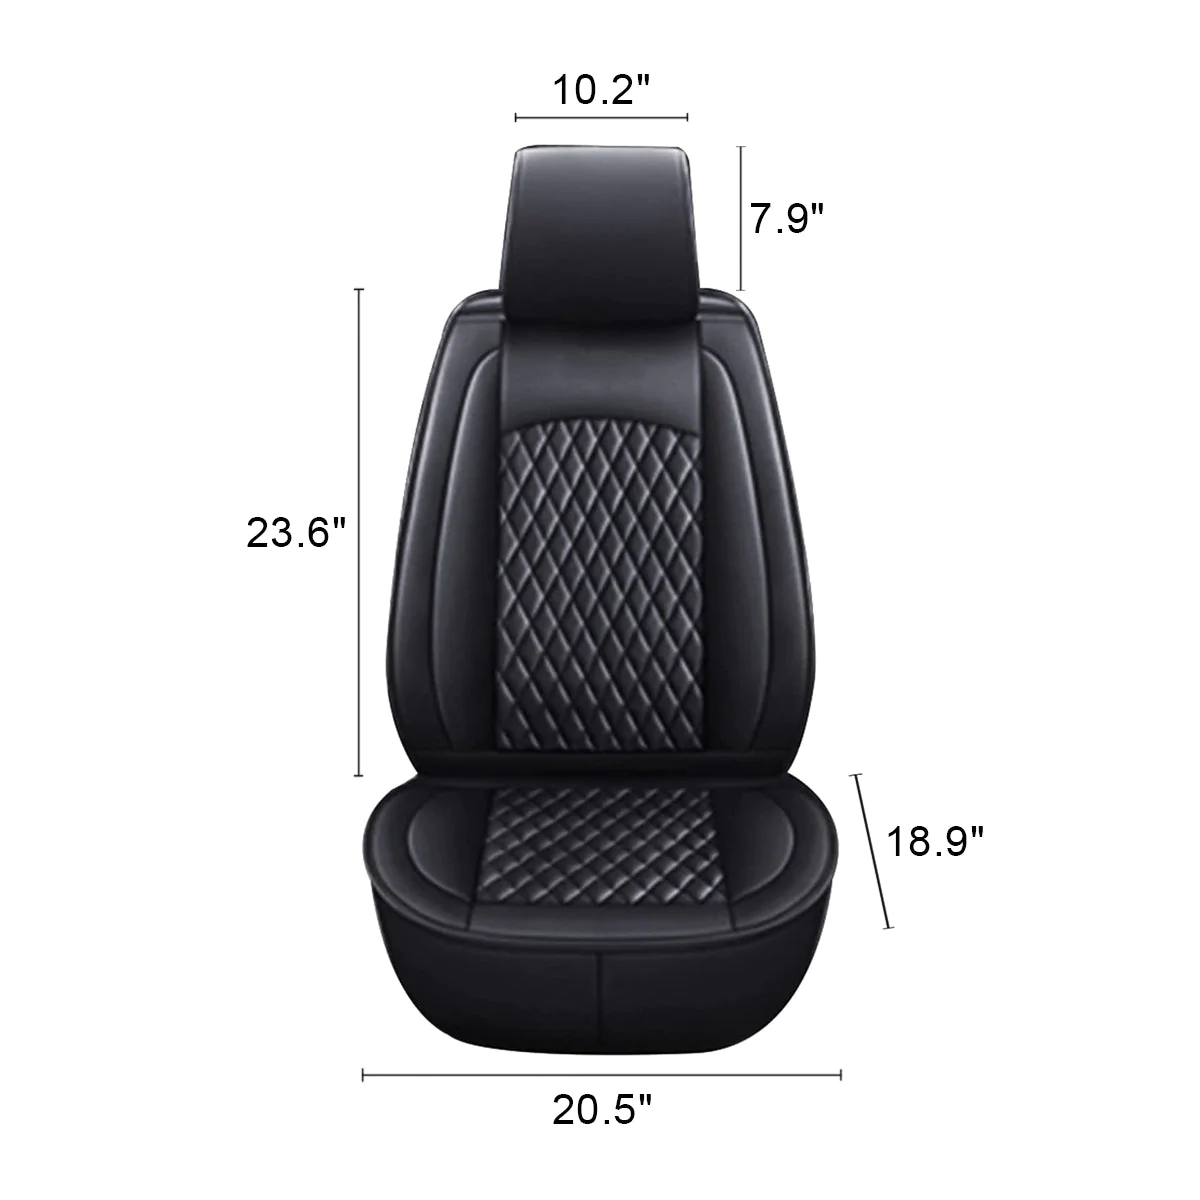 Custom Text For Seat Covers 5 Seats Full Set, Custom Fit For Your Cars, Leatherette Automotive Seat Cushion Protector Universal Fit, Vehicle Auto Interior Decor PE13988